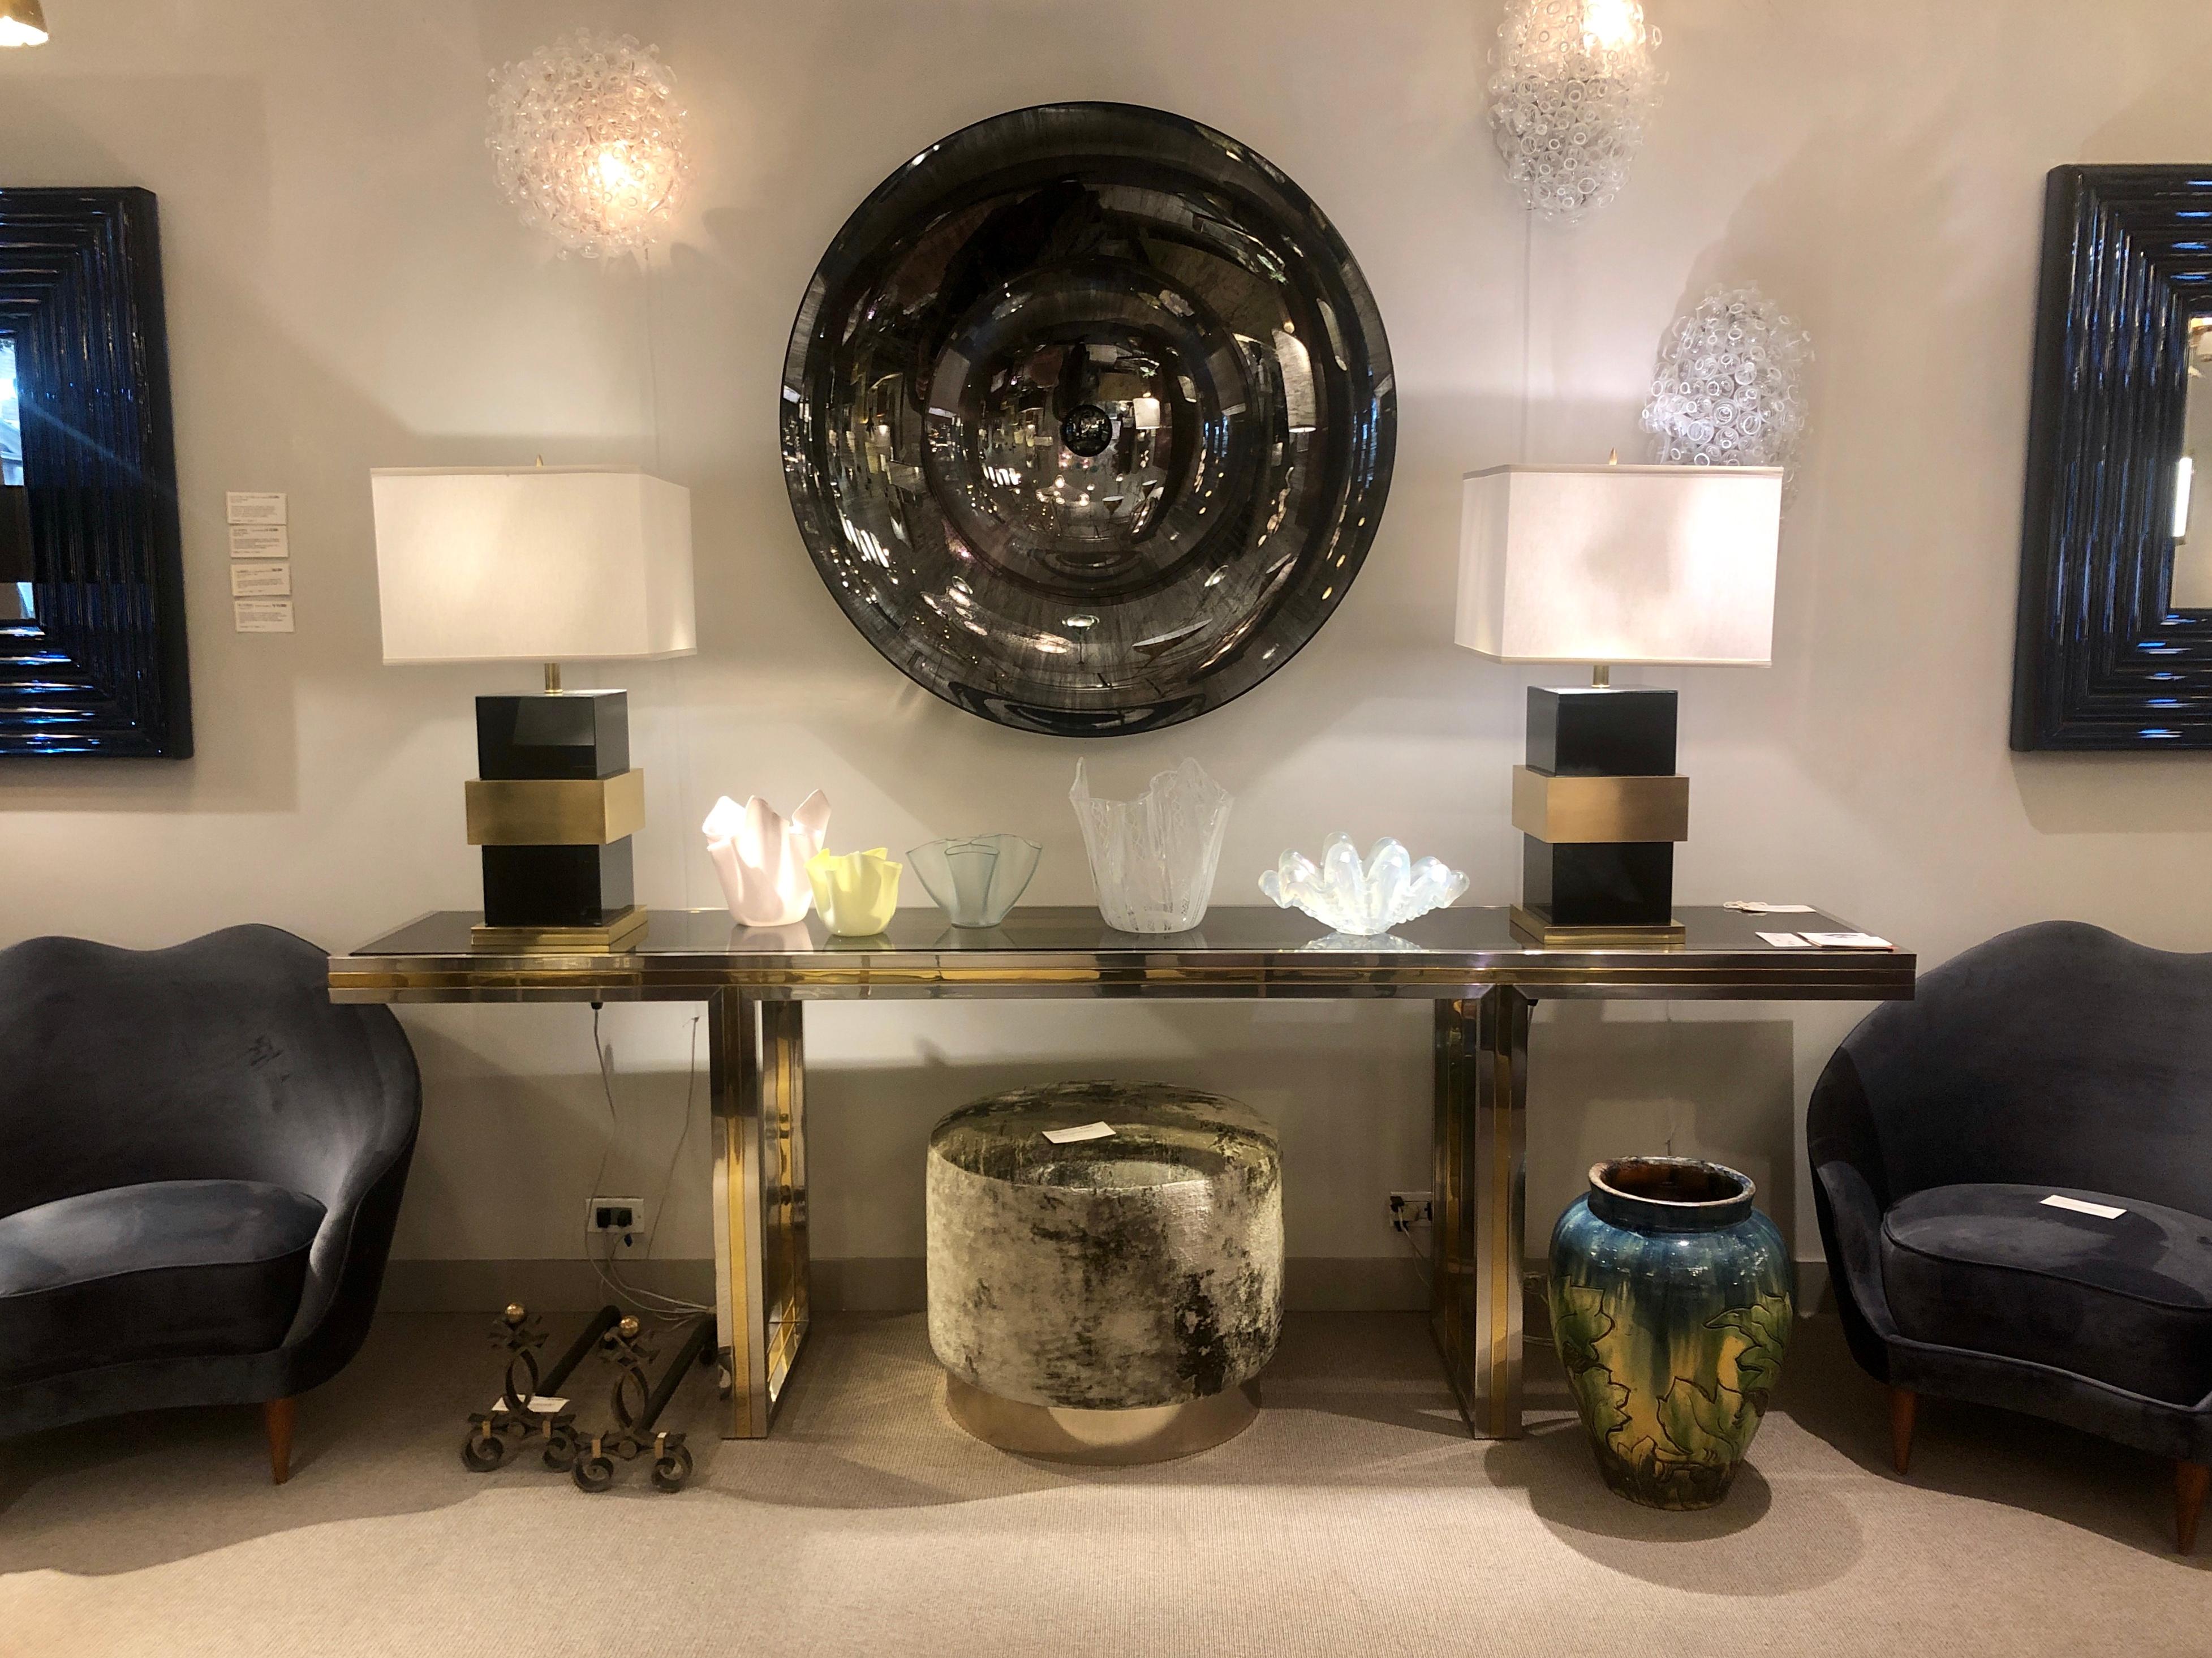 Black plexiglass bodies, each holding a broad brass band in its middle, raised on a square brass base.

(Lamp shade not included)